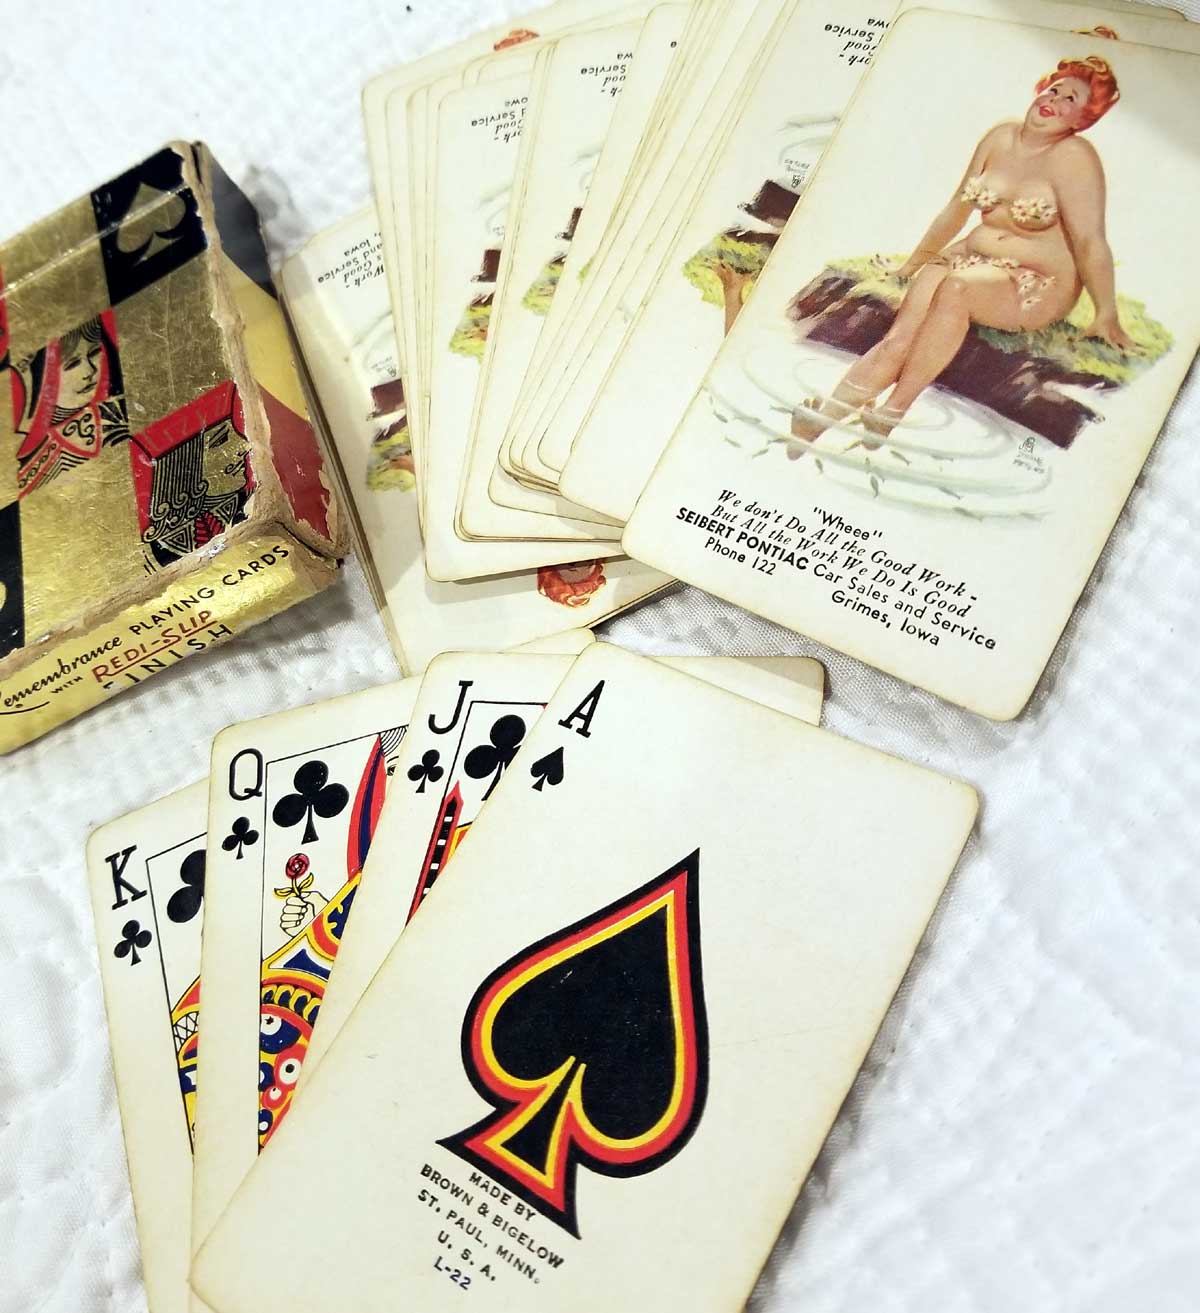 “Remembrance” playing cards manufactured by Brown & Bigelow, c.1940s